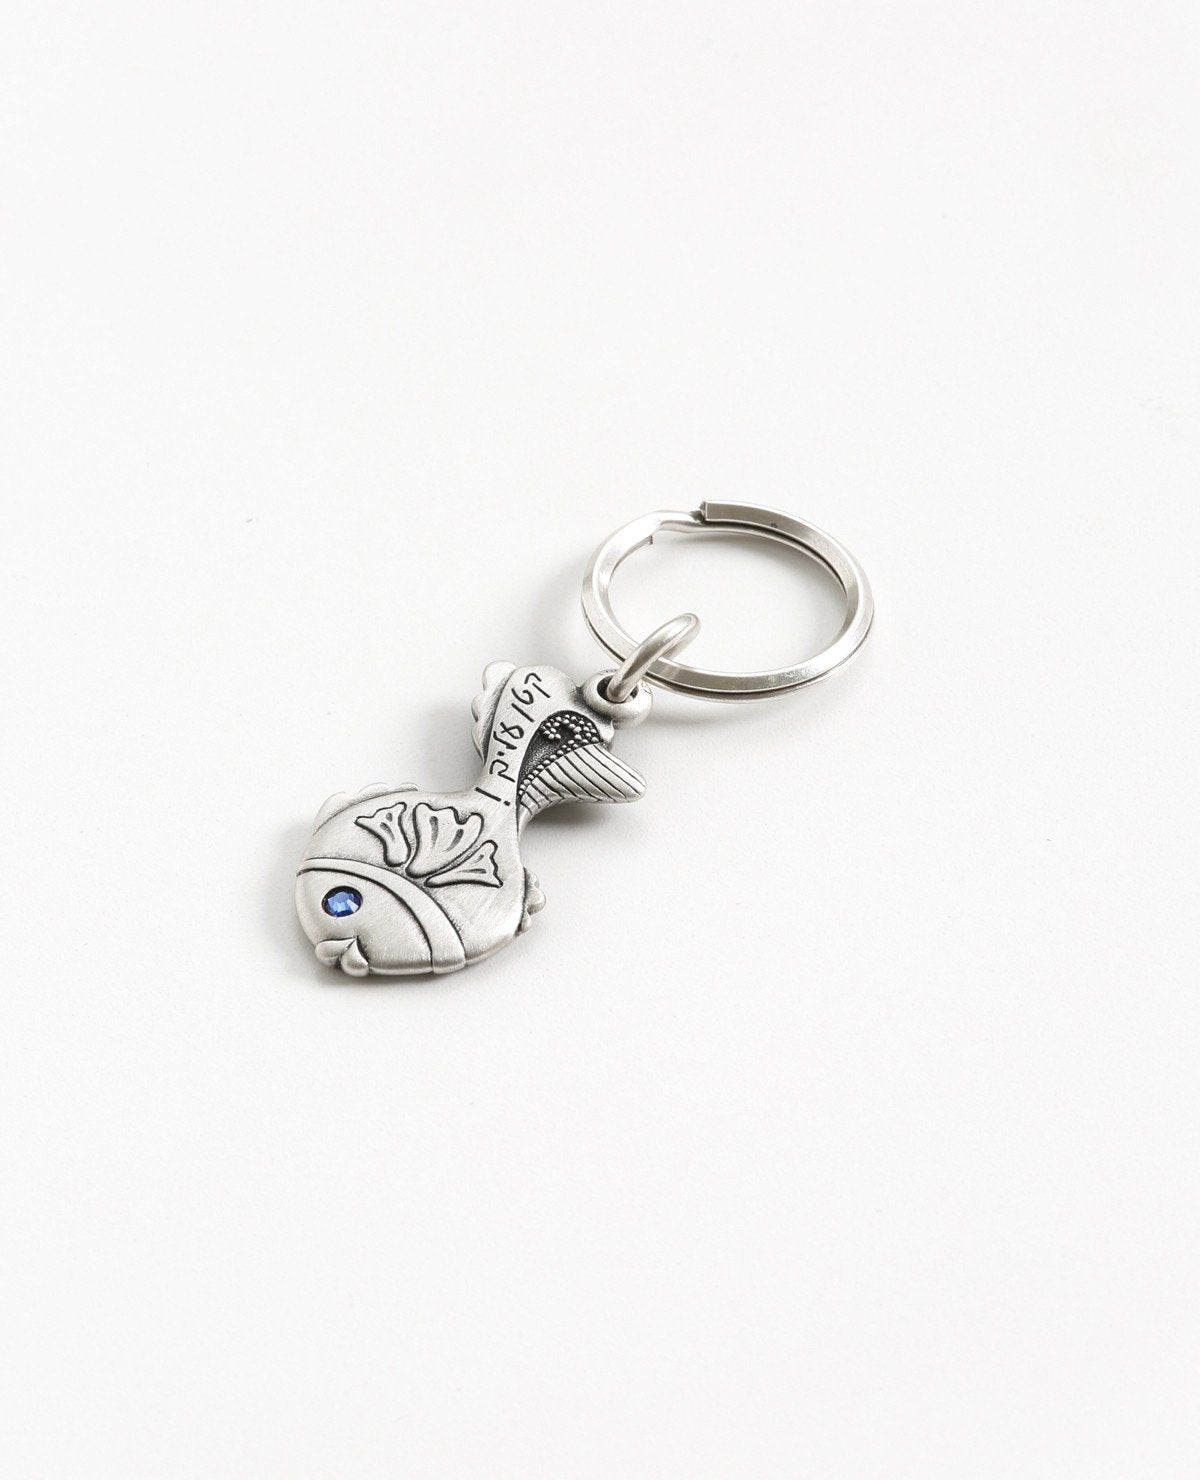 A small fish keychain with the words "easy for you!". The word 'easy' is coated in sterling silver and embedded with a blue colored Swarovski crystal. The design is sweet and elegant, plus it's fun to pull out of your pocket with all your keys safely attached. Together with a loving smile, it makes a great gift to give to those that matter to us, in order to remind them how talented and capable they are in accomplishing anything they may choose. The luck is already inside.   Length: 5 cm  Width: 2 cm